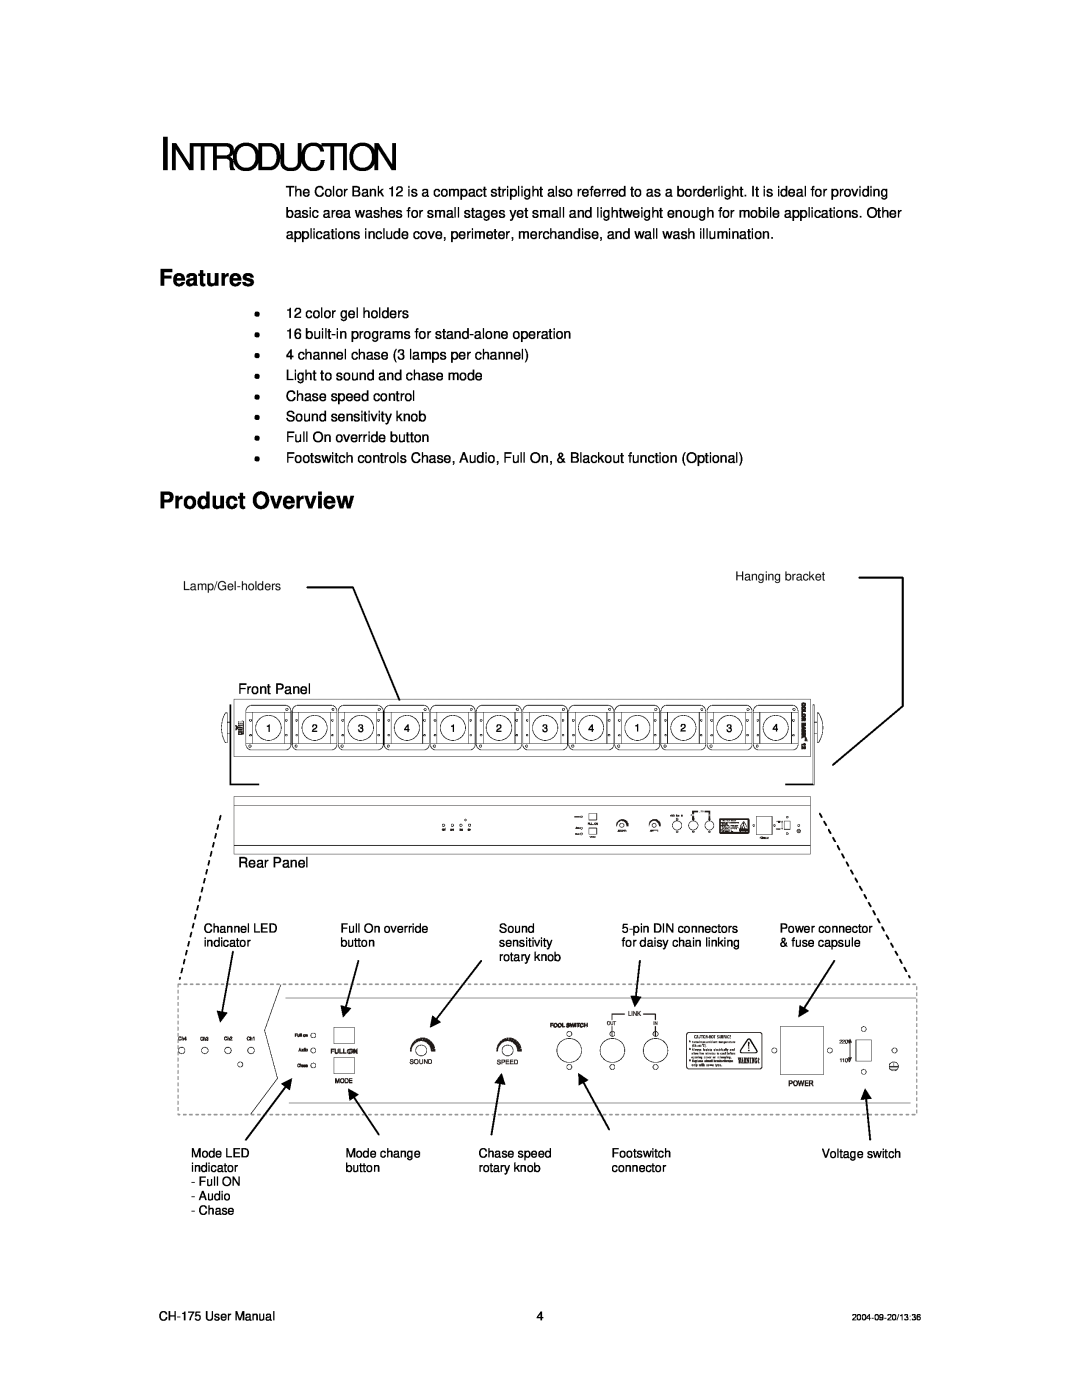 Chauvet CH-175 user manual Introduction, Features, Product Overview 